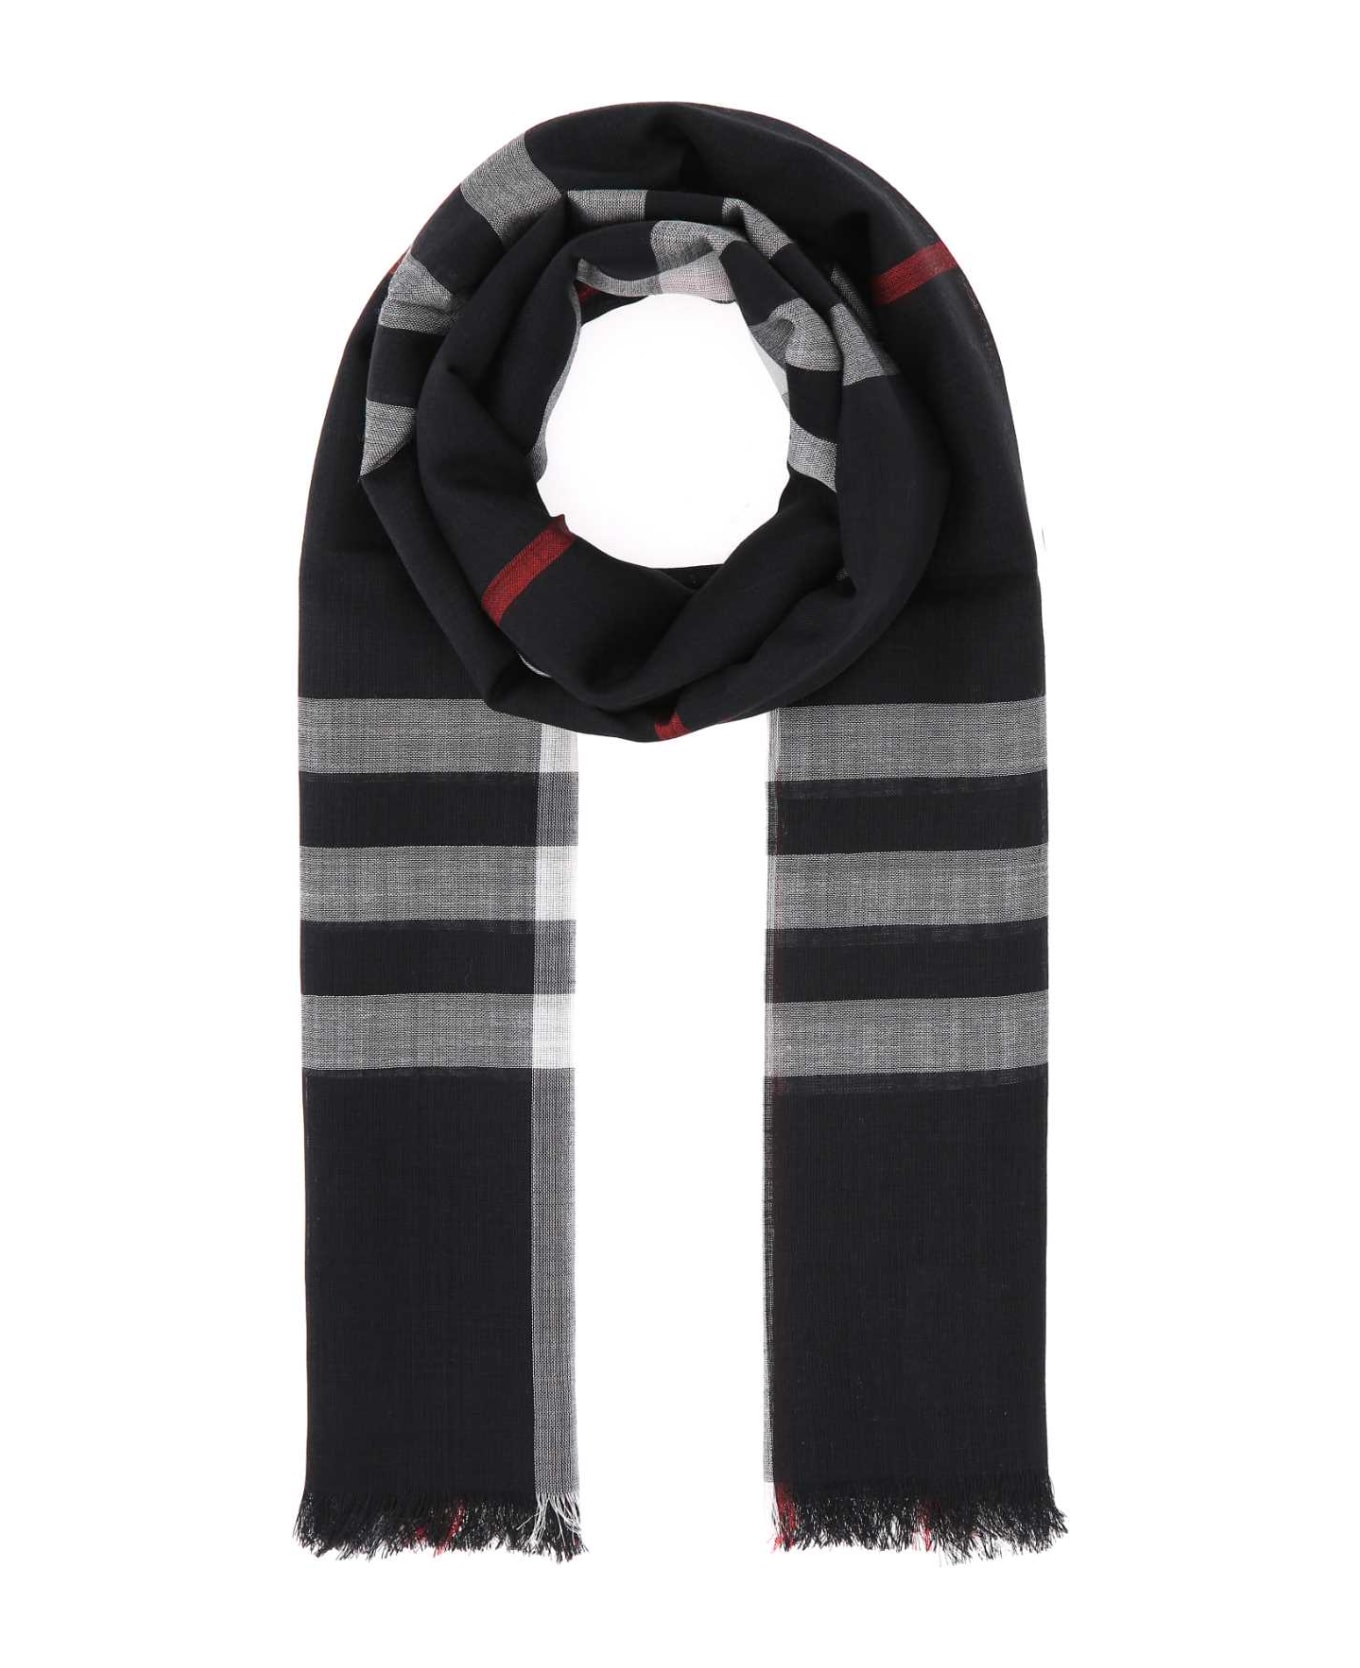 Burberry Embroidered Wool Blend Scarf - NAVY